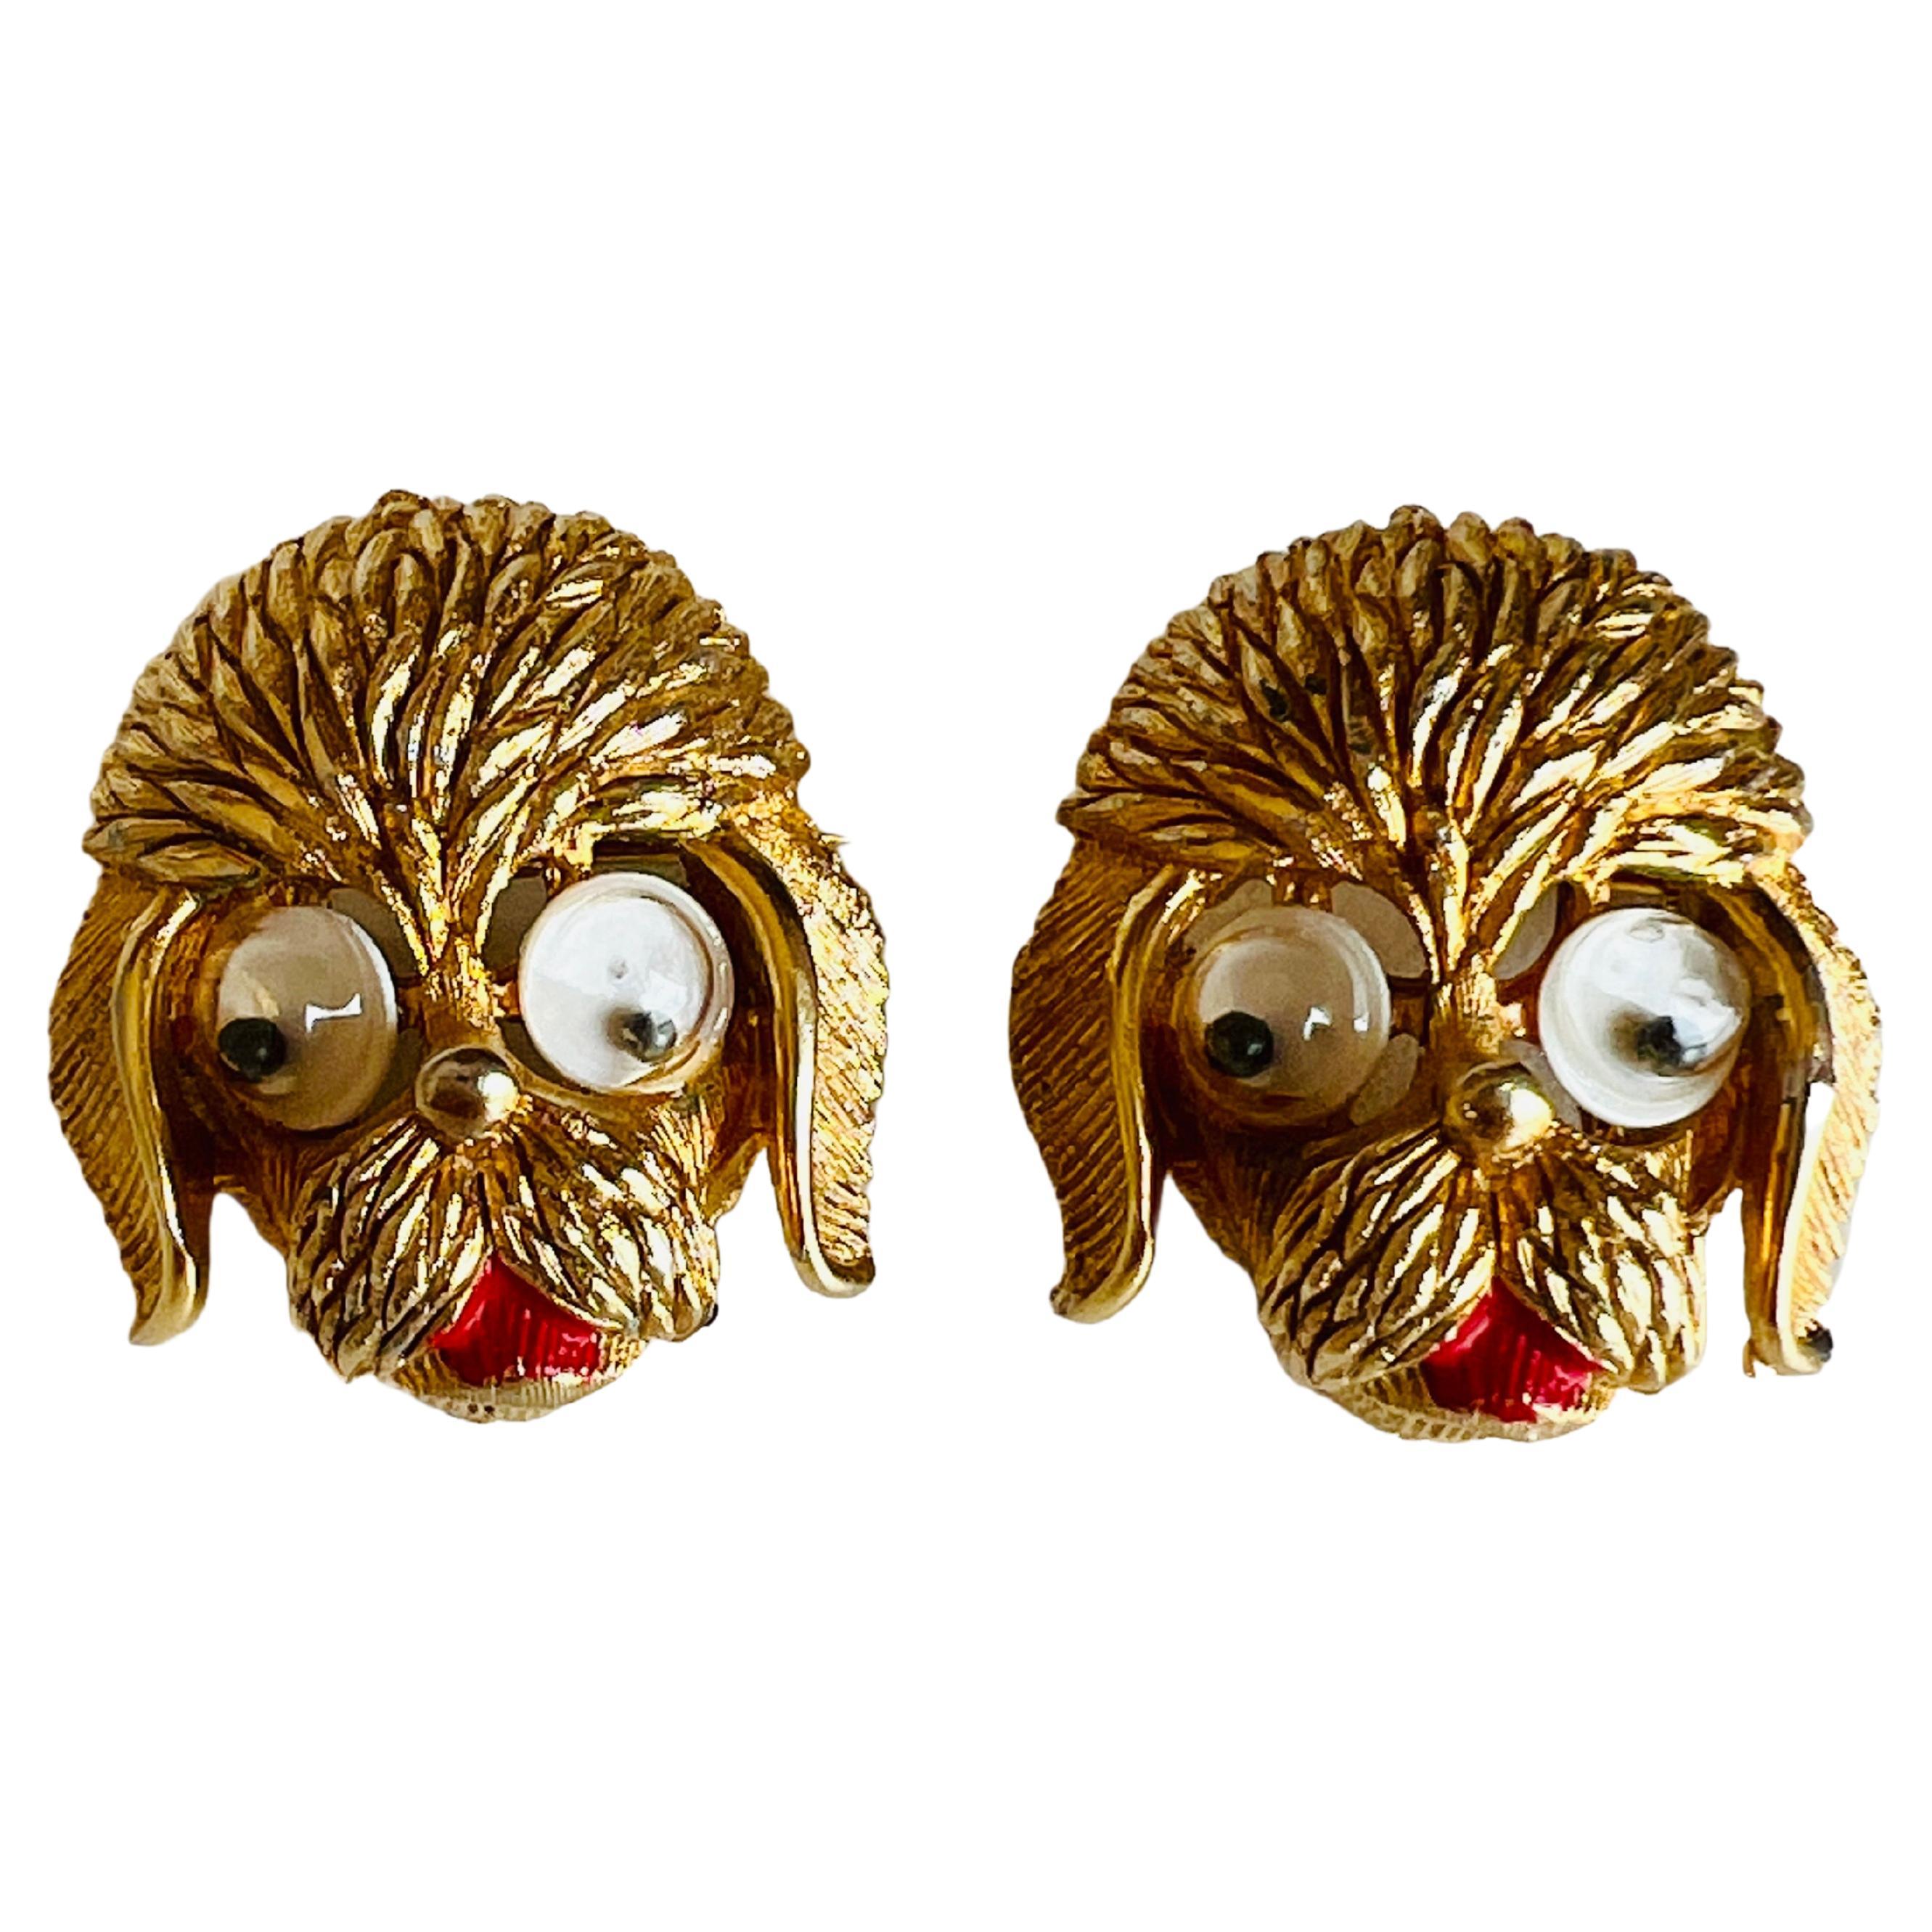 Pair of Gold Tone Googly Moving Eyes Figural Puppy Dog Brooch Pins W/ Red Mouth For Sale